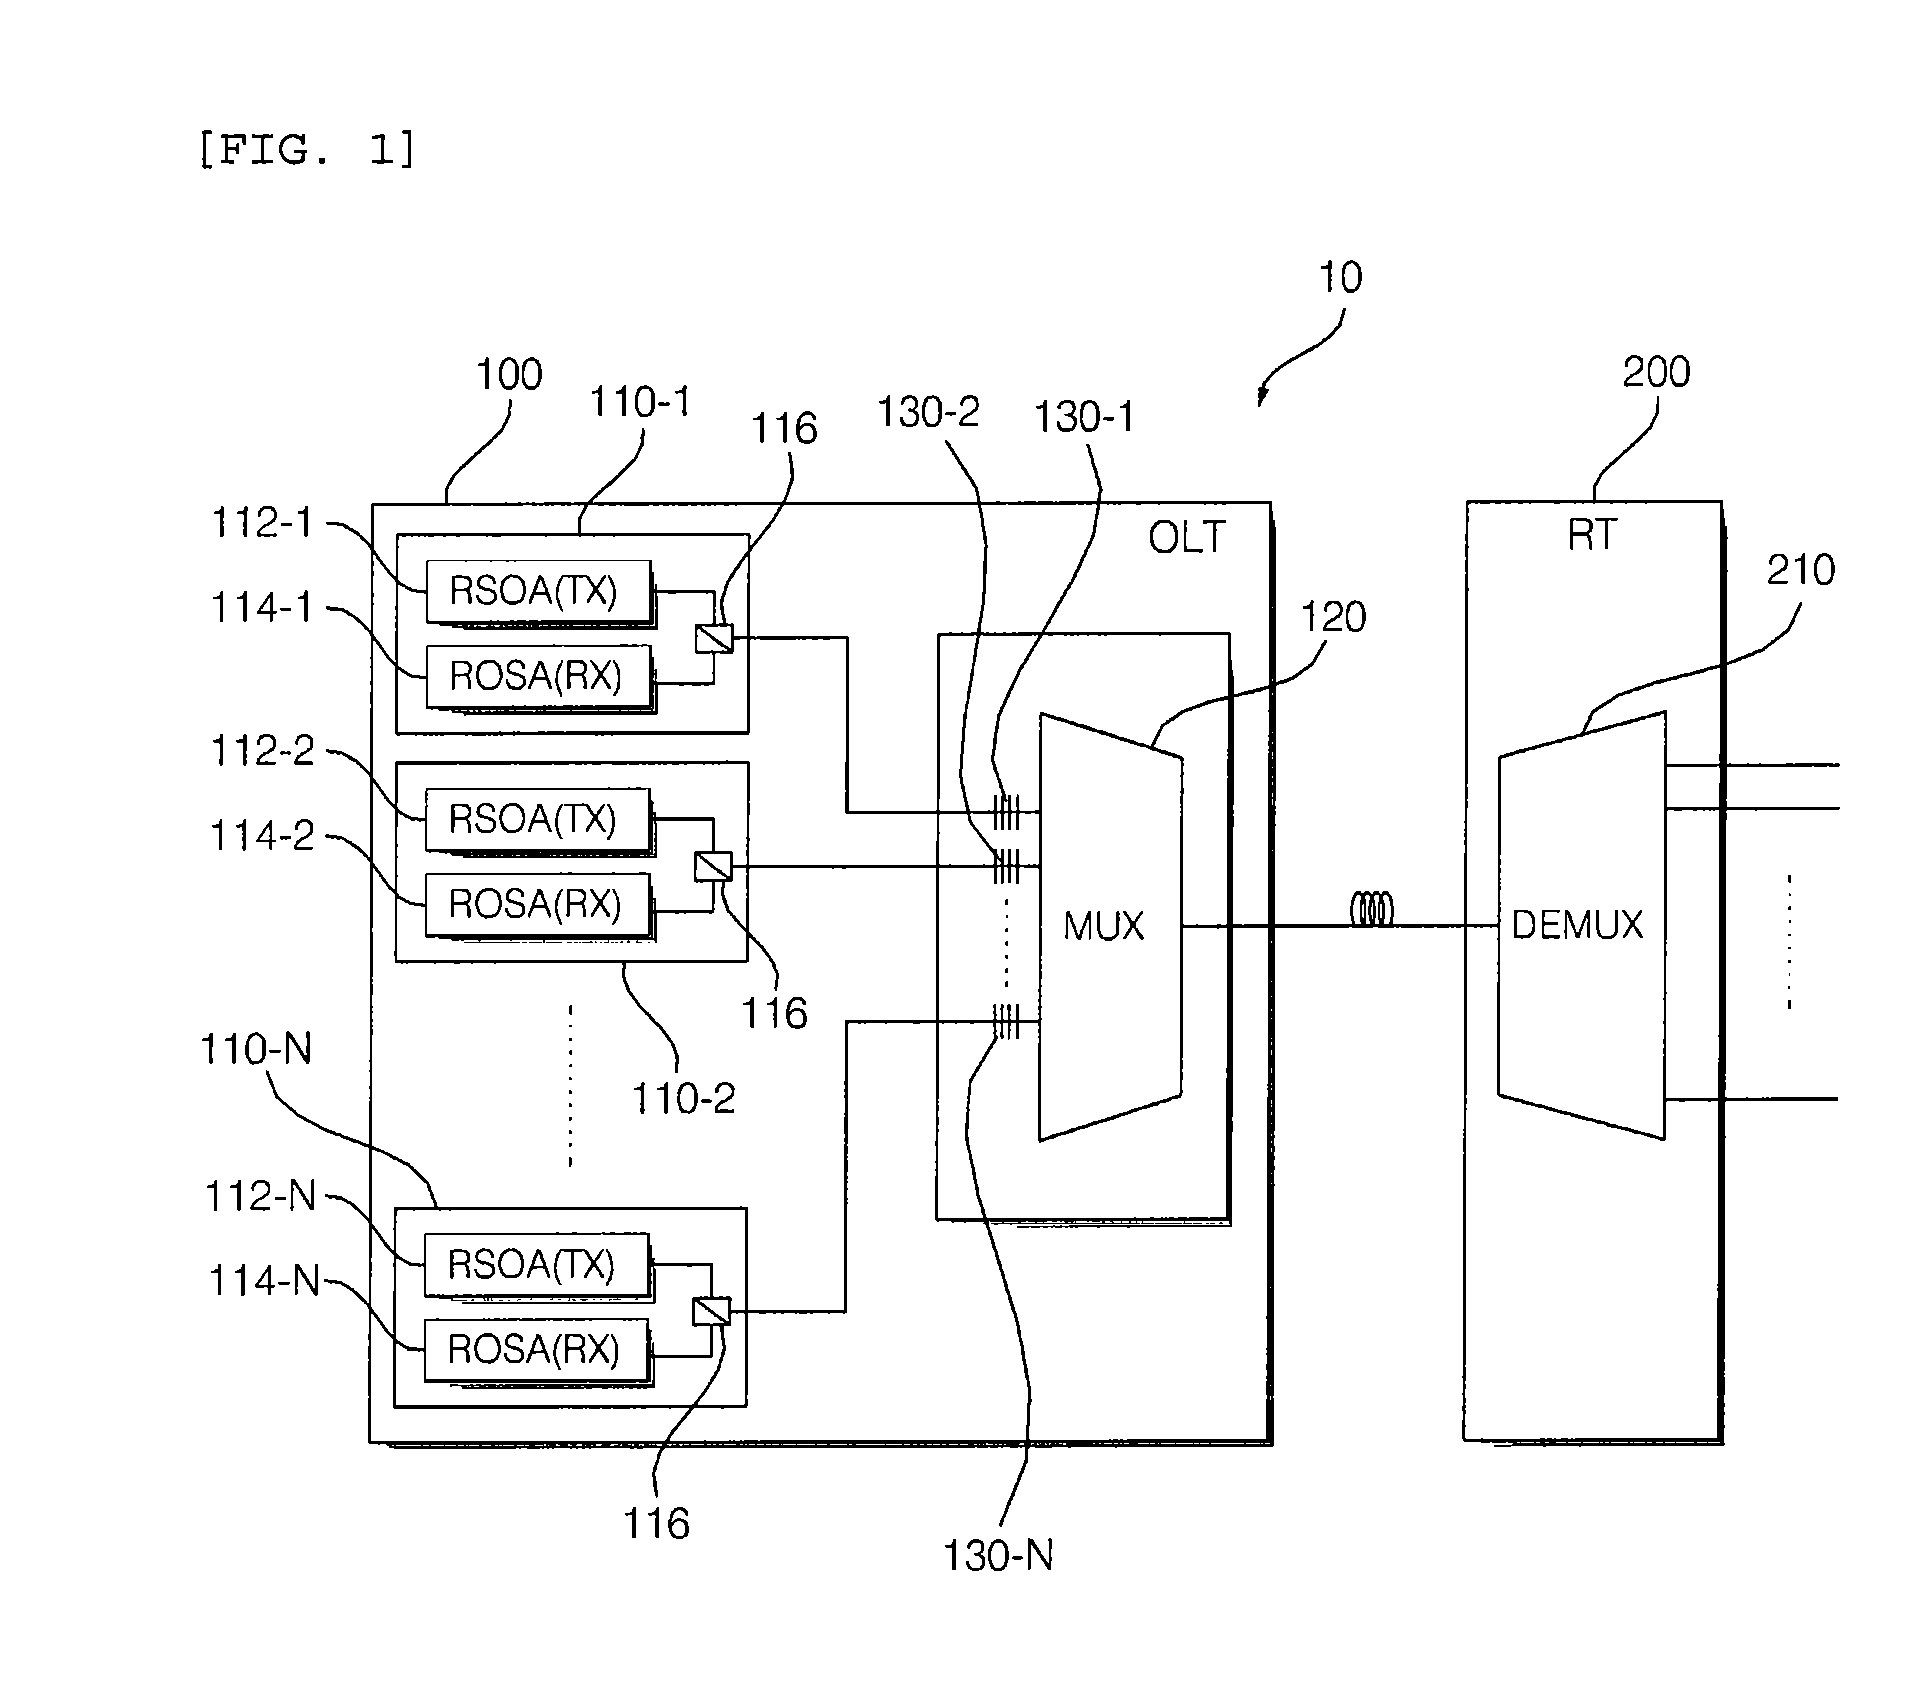 Wdm-pon system using self-injection locking, optical line terminal thereof, and data transmission method